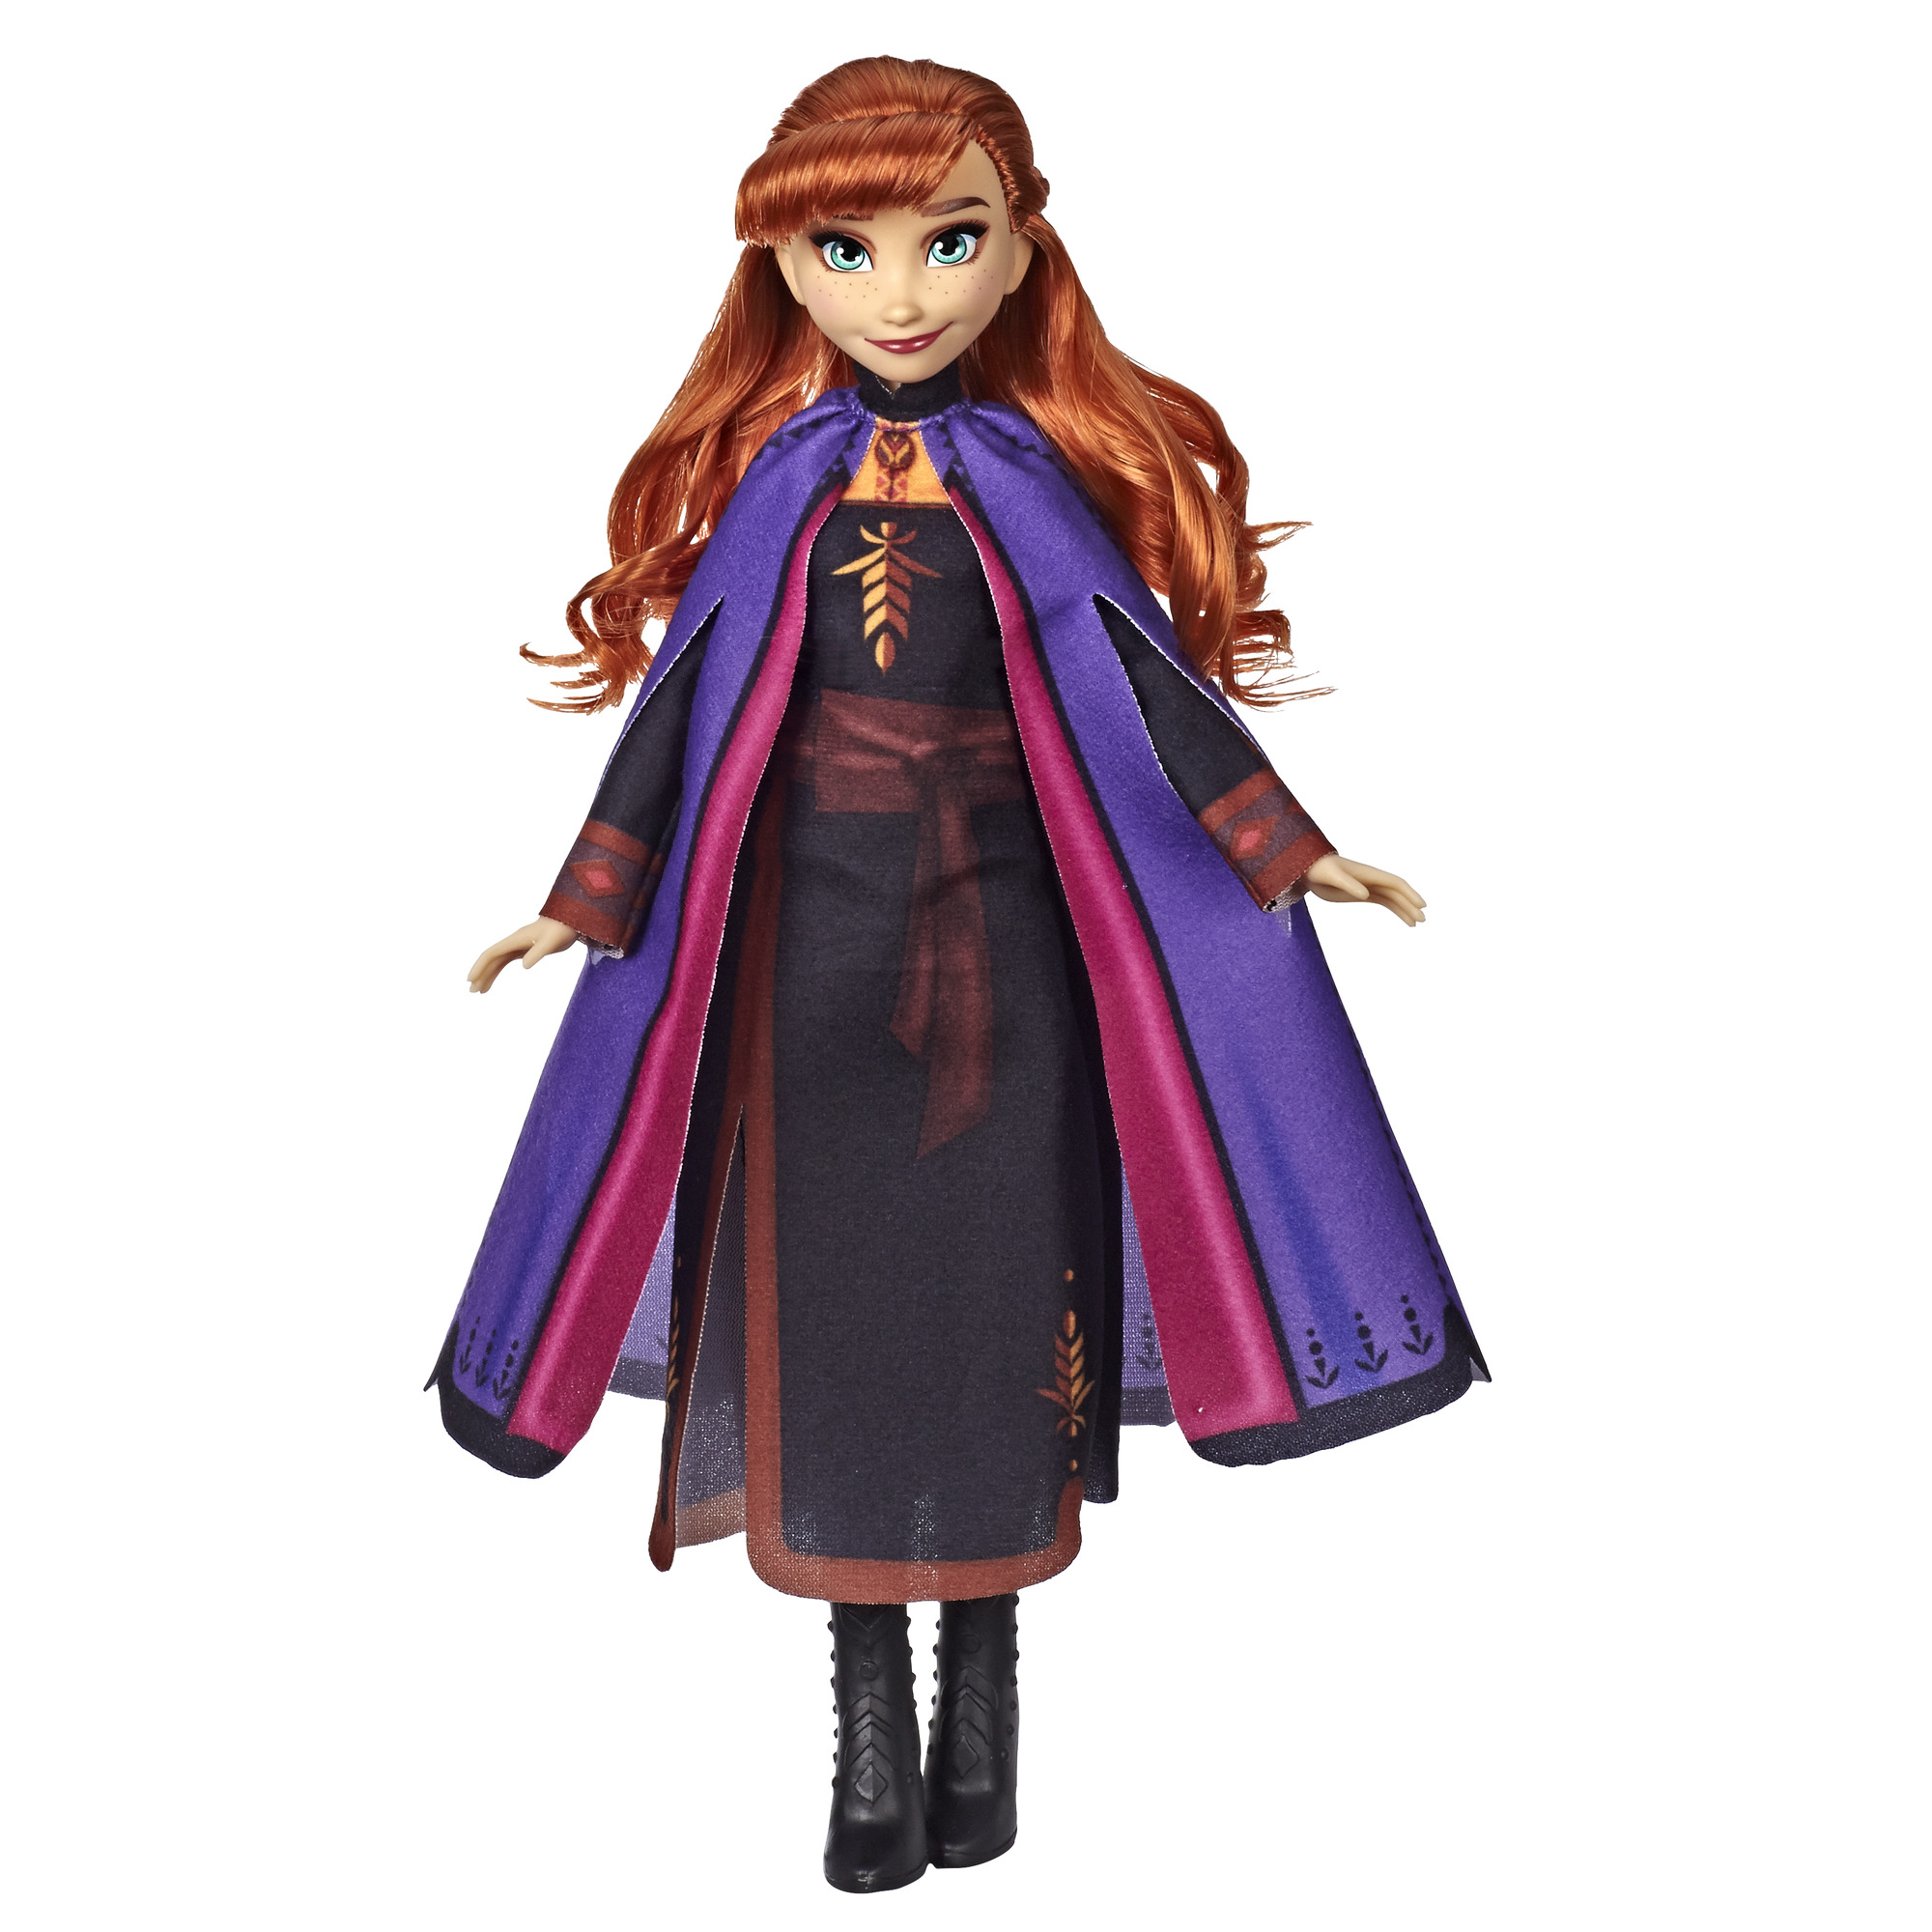 Disney Frozen Anna Fashion Doll With Long Red Hair and Outfit Inspired by Frozen 2 - image 1 of 3